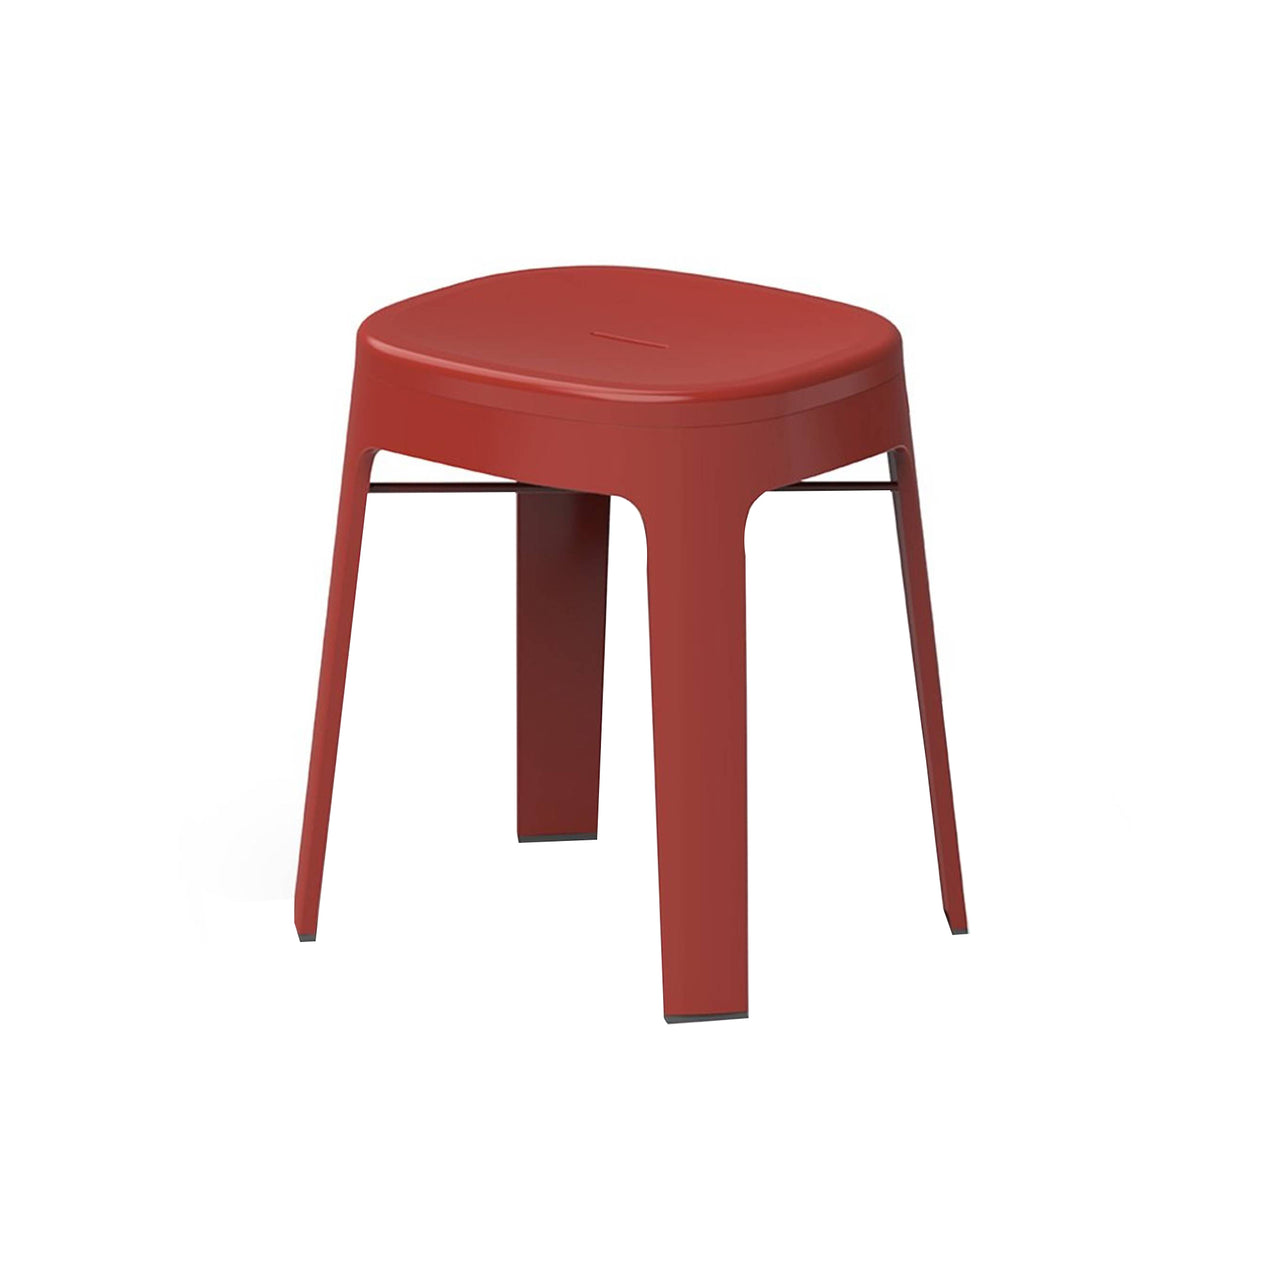 Ombra Stool: Stacking + Red